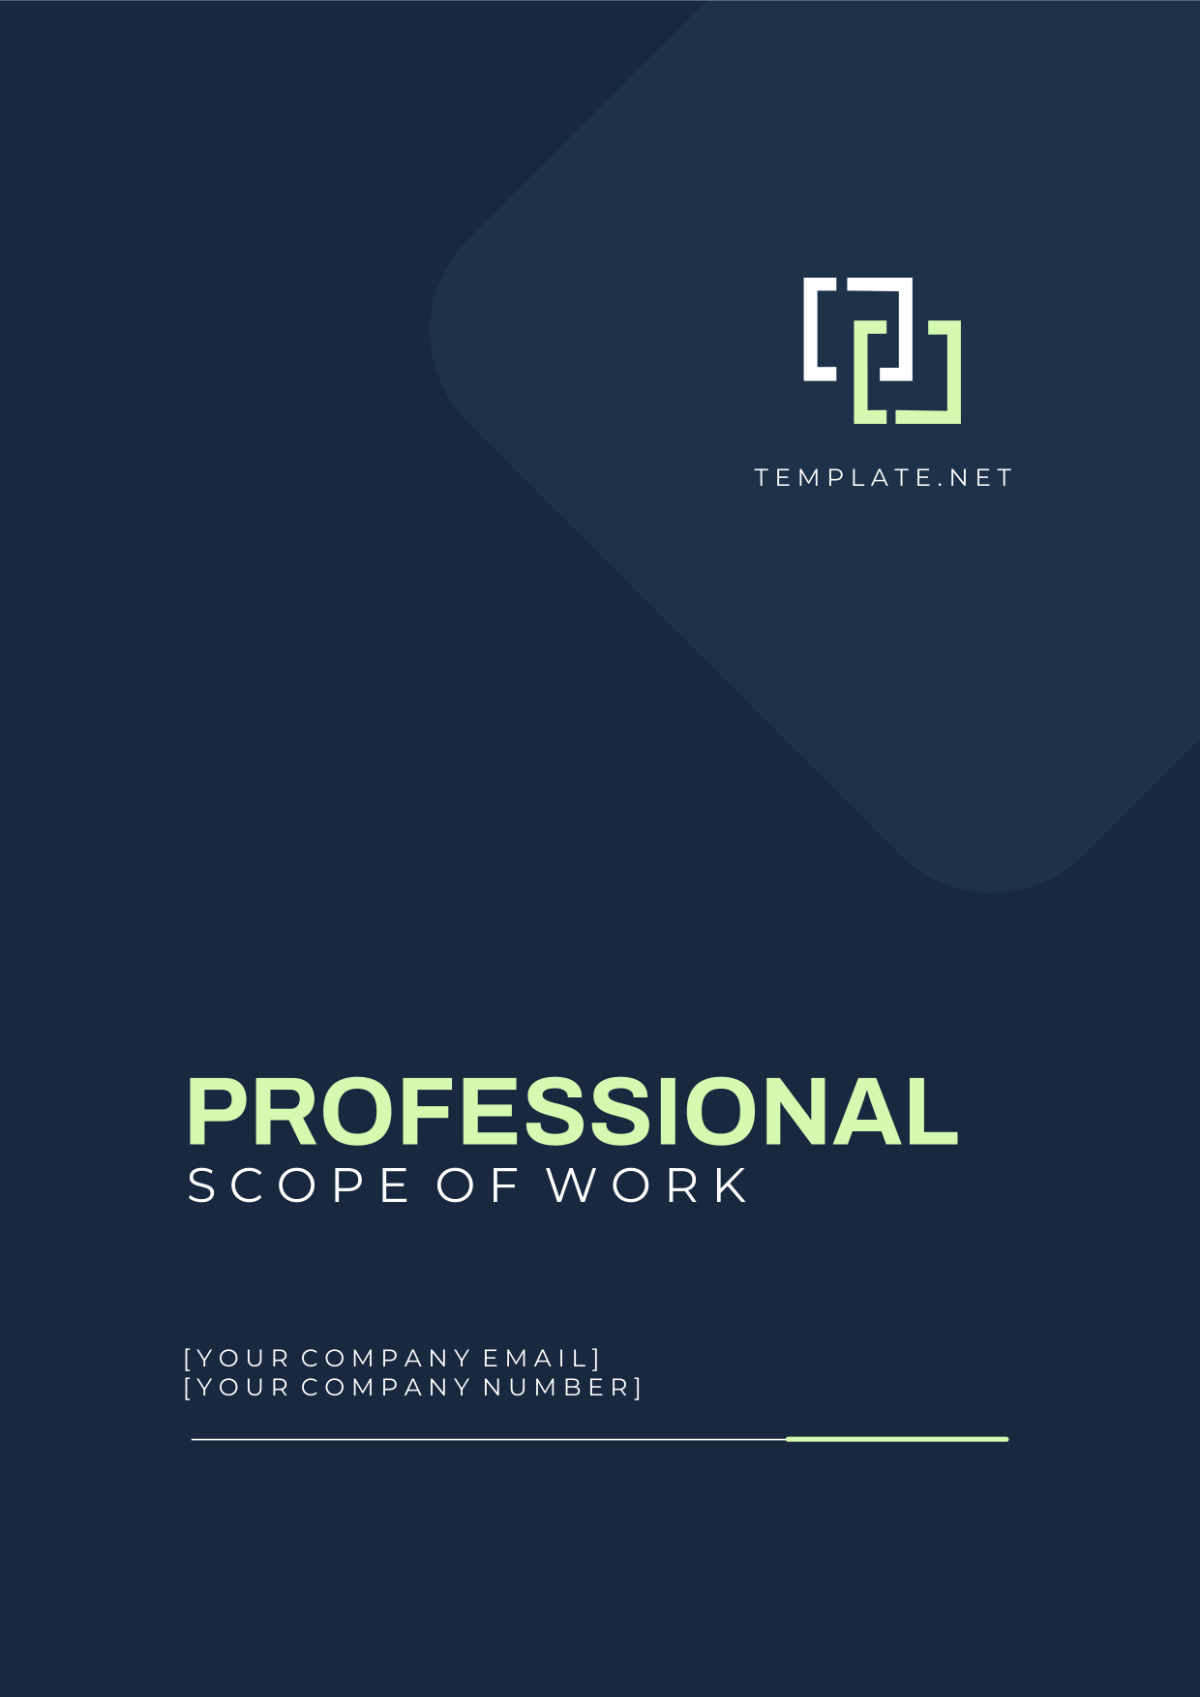 Professional Scope of Work Cover Page